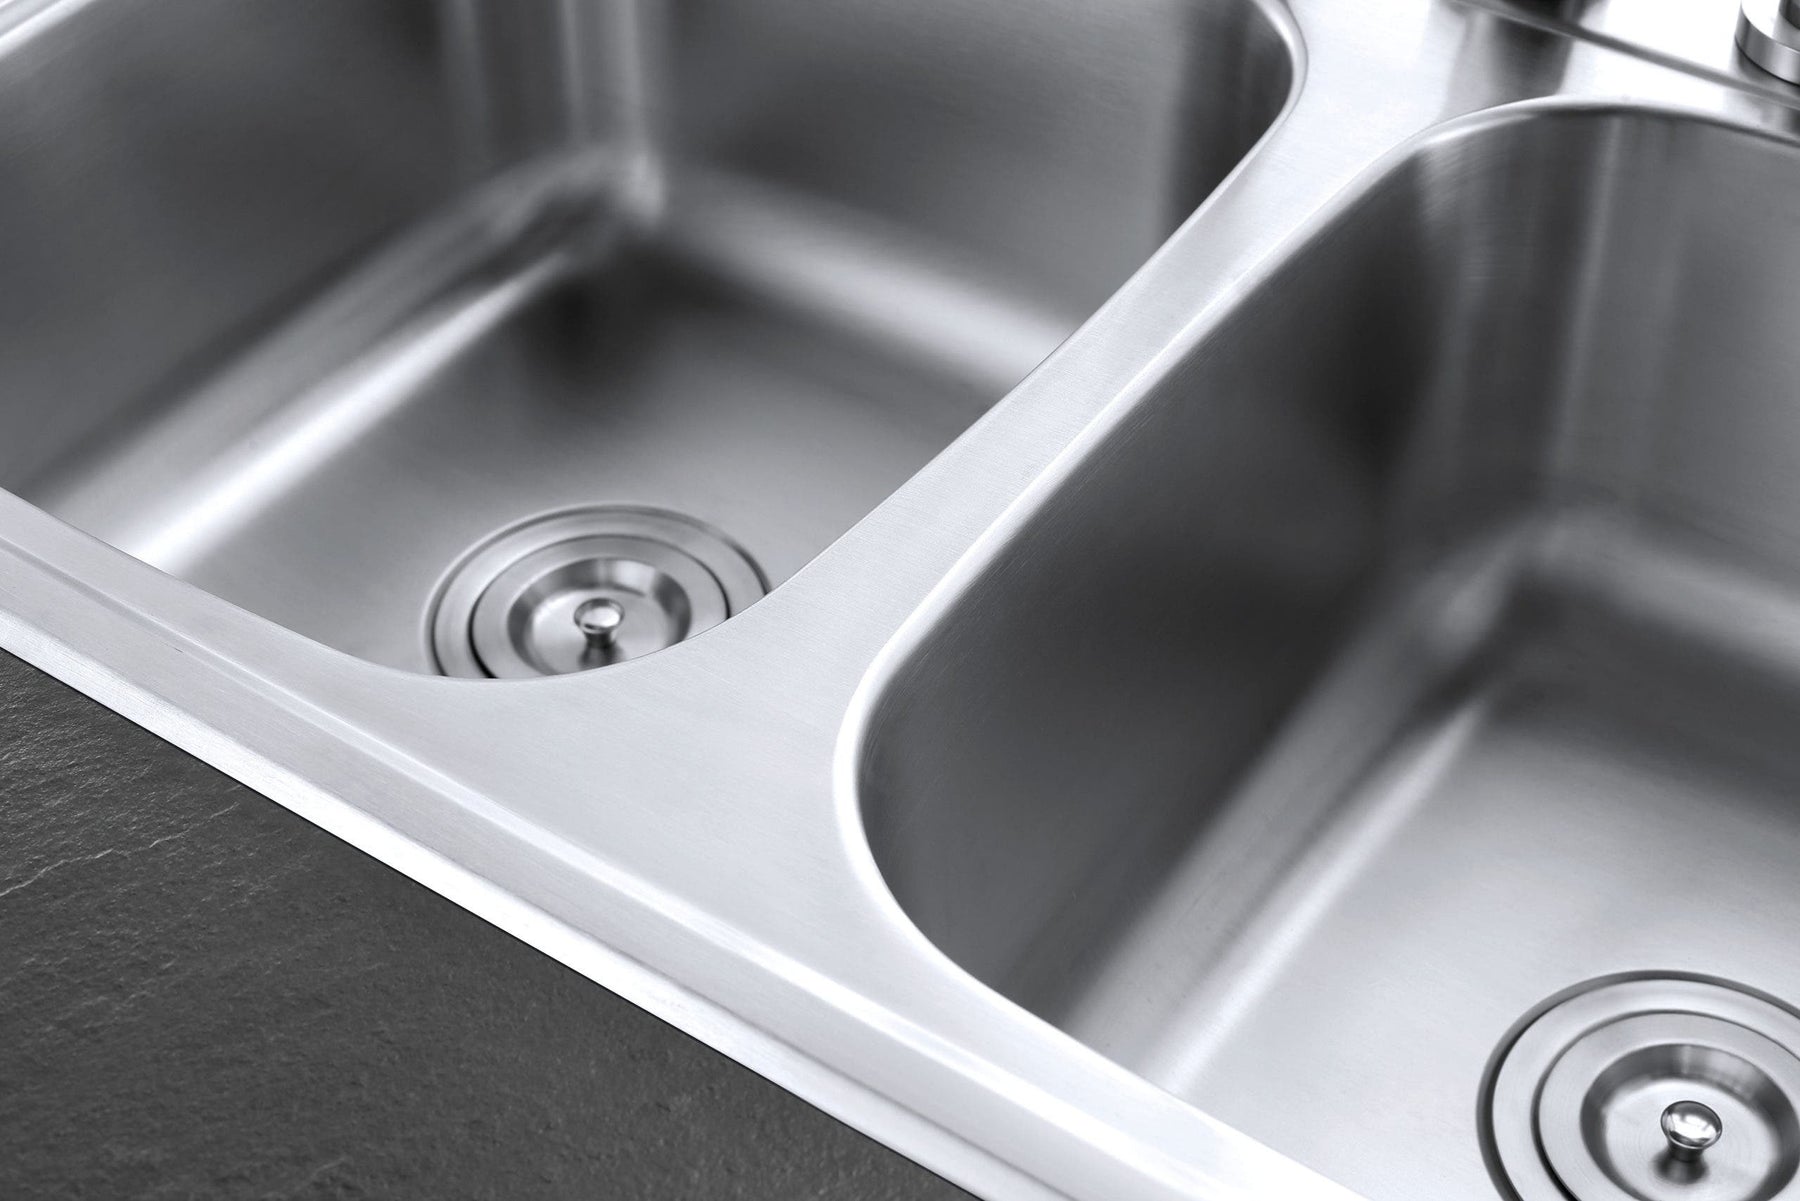 Frequently Asked Questions About Sink Replacement